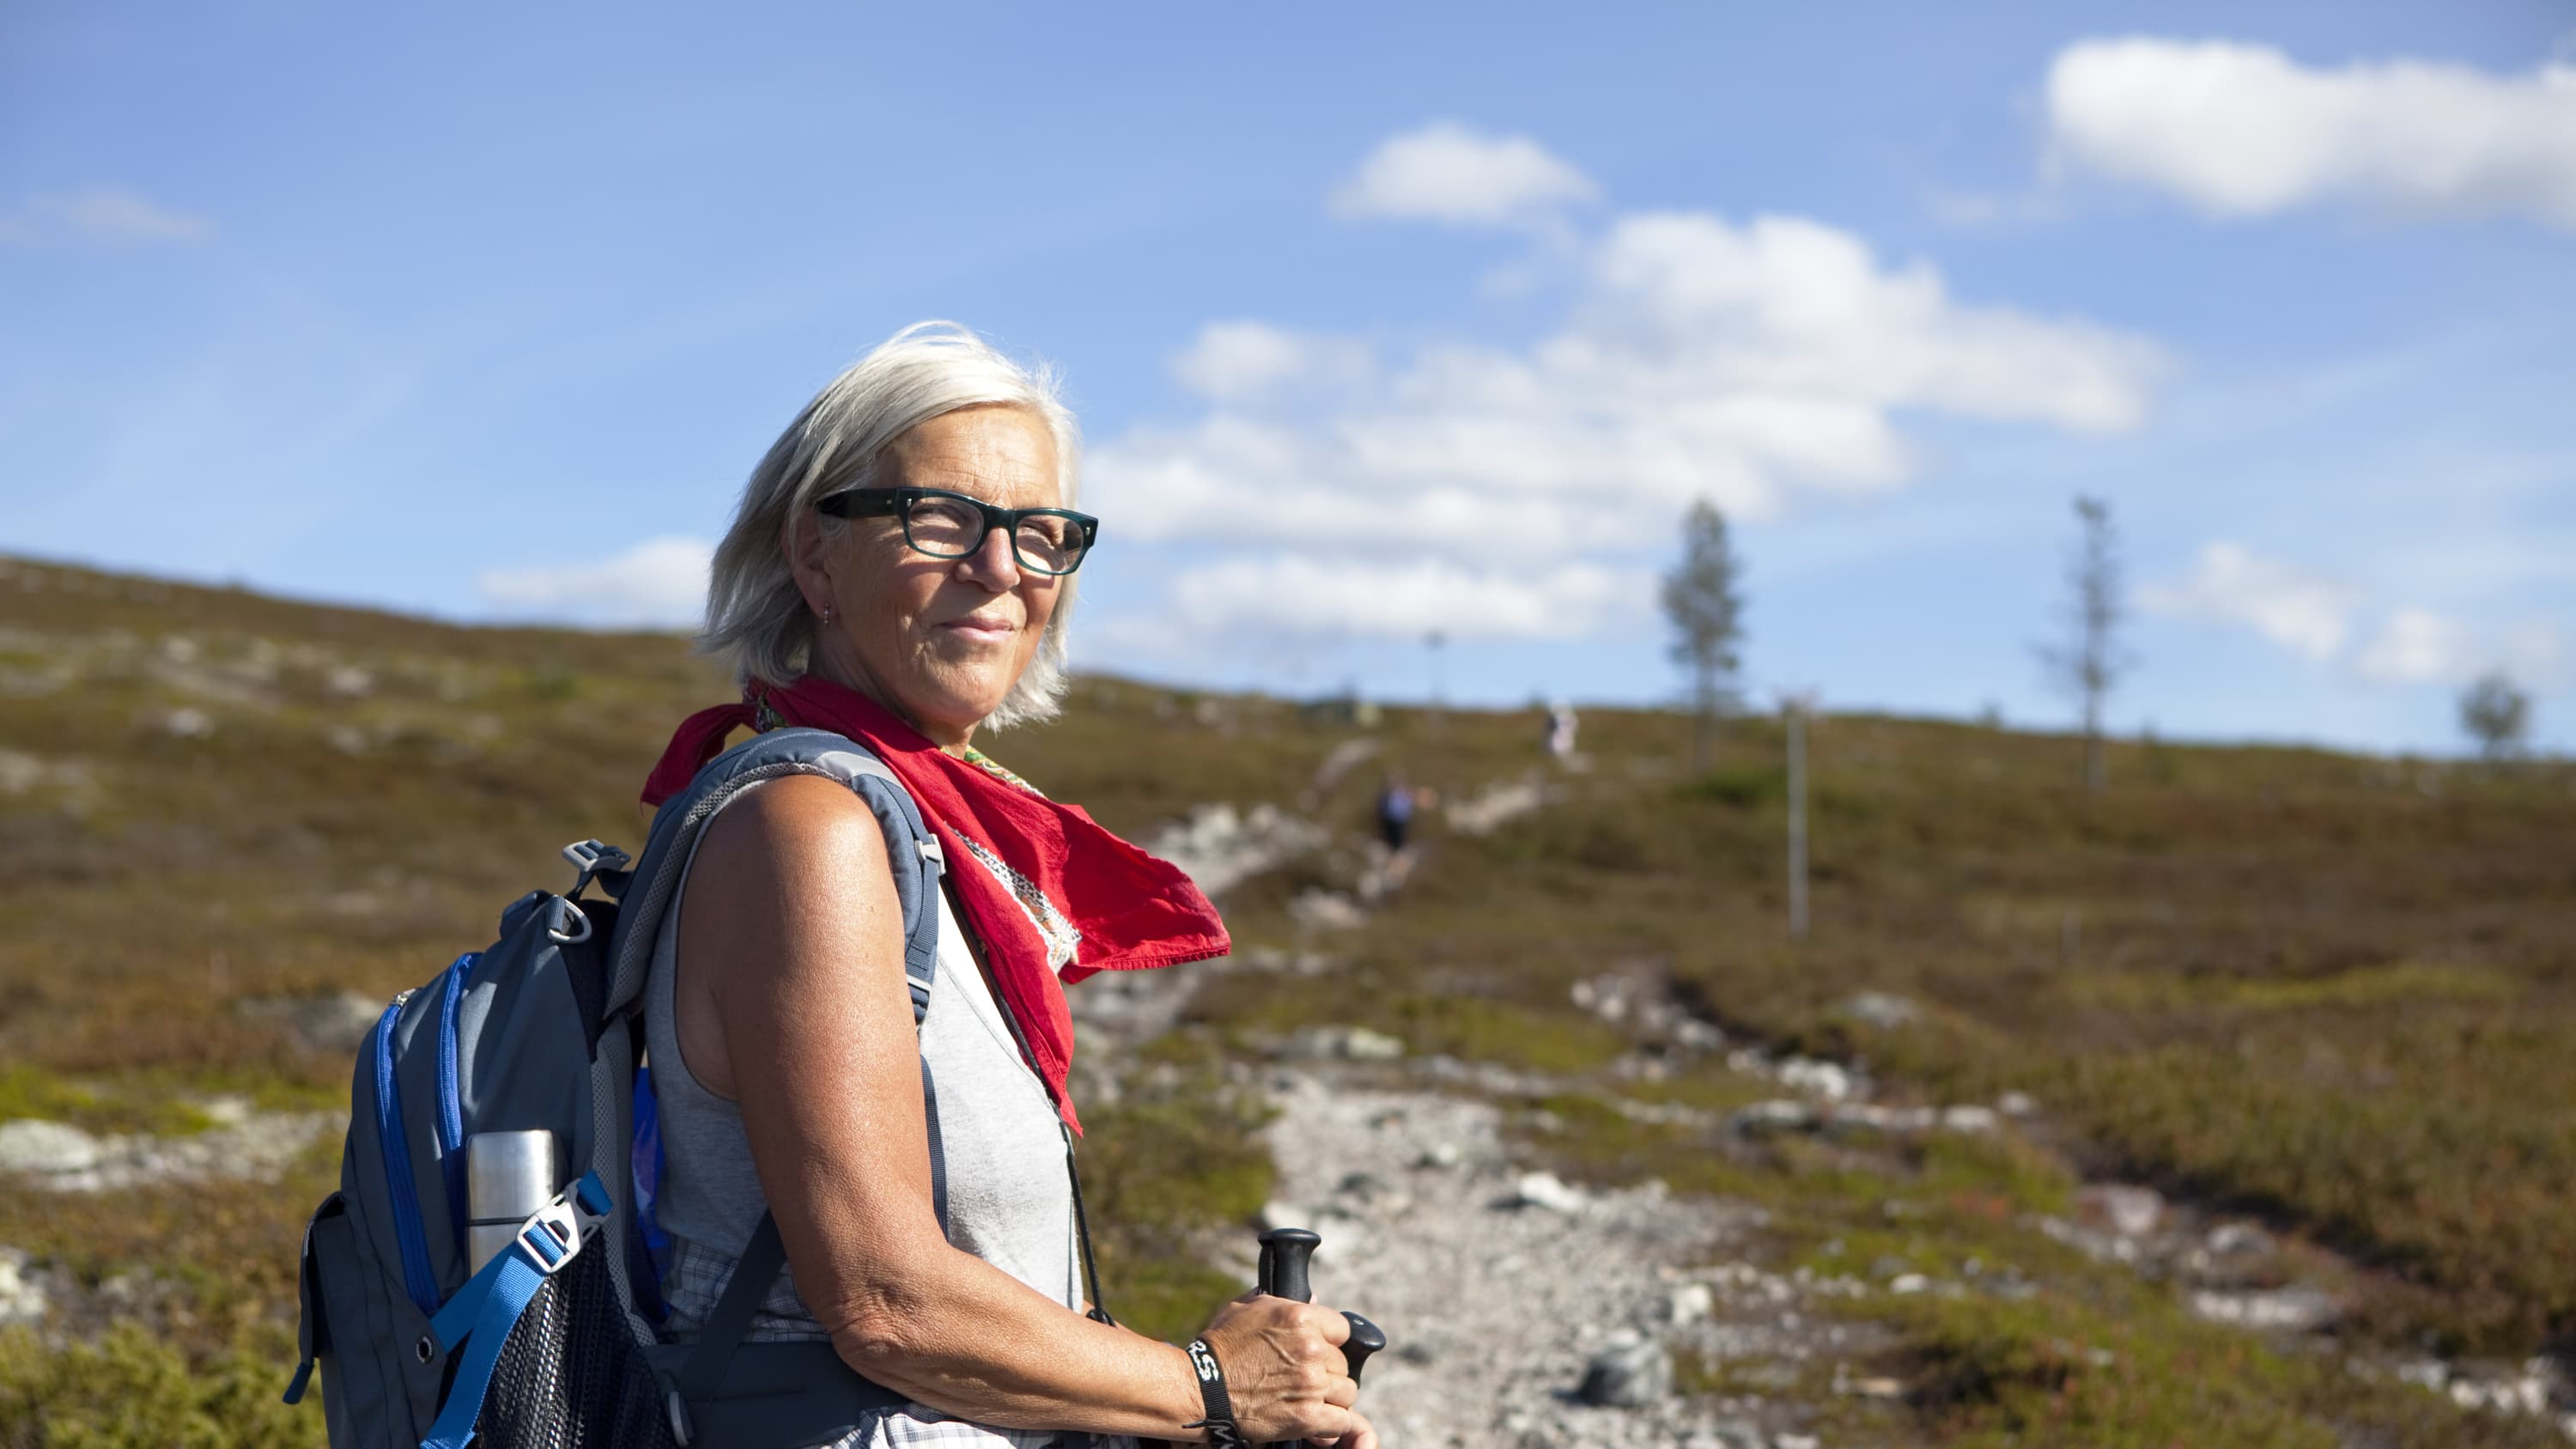 older woman hiking after taking anti-obesity medications before and after joint replacement and bariatric surgery